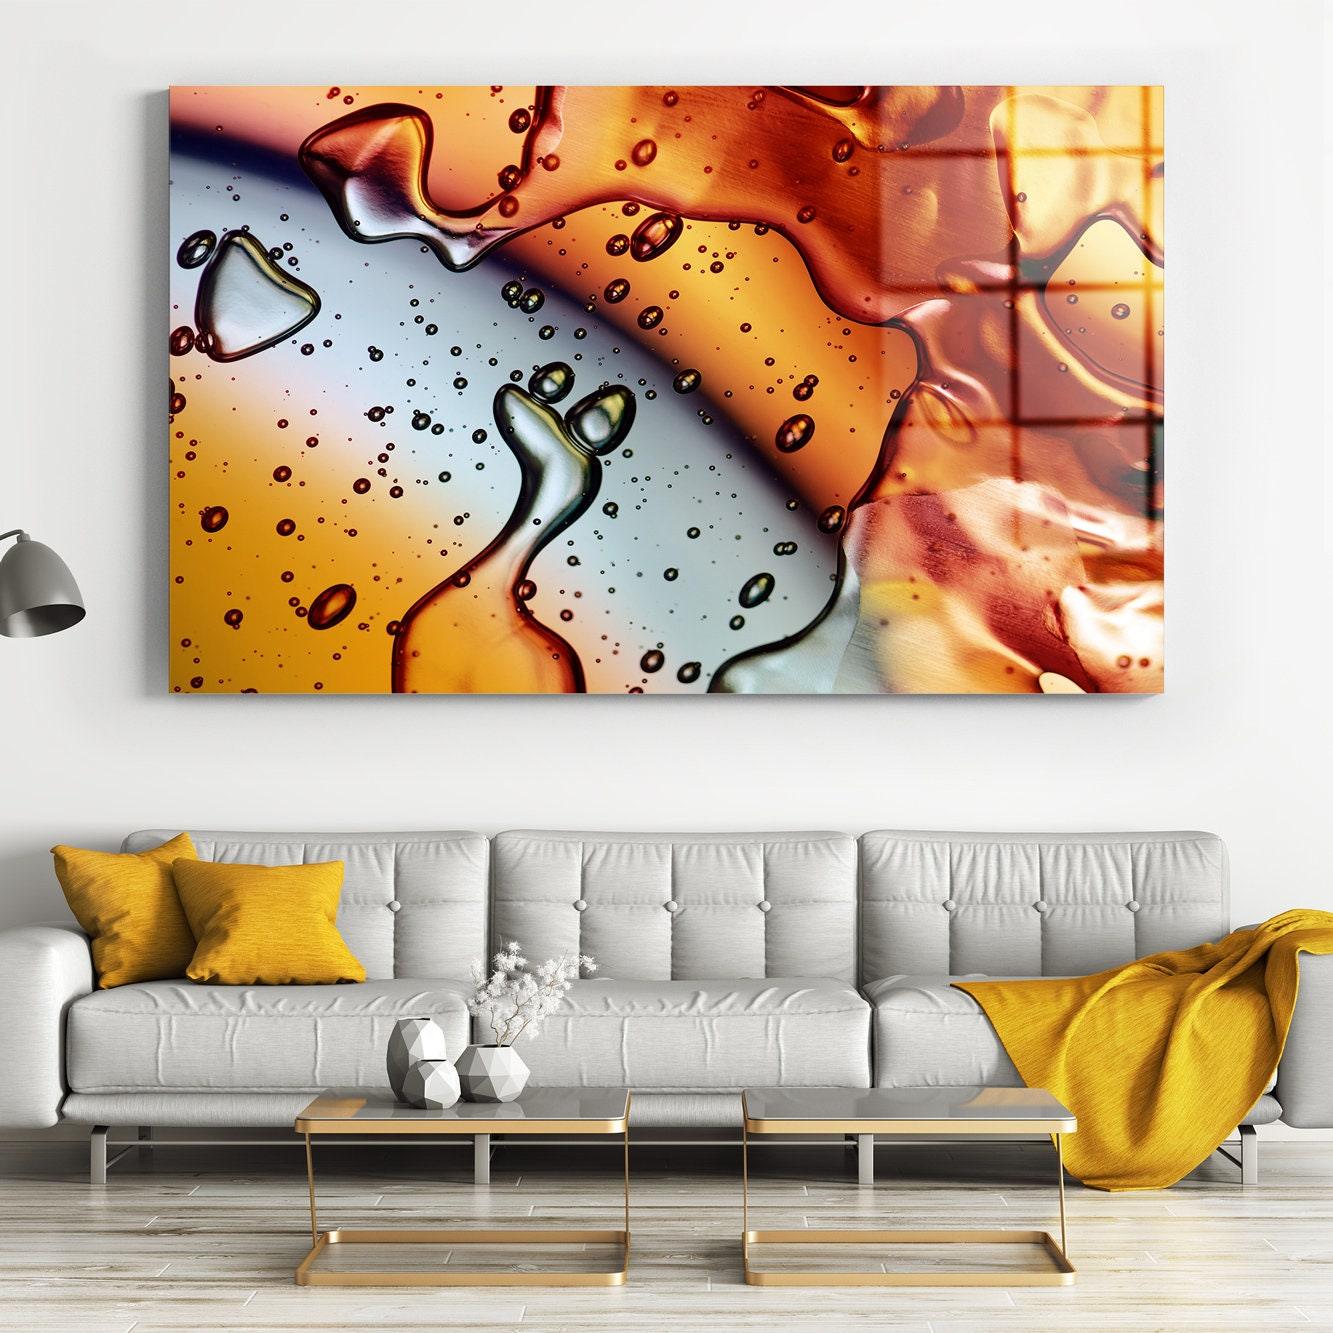 3 color abstraction wall deco| Raindrops on the surface, Abstract modern art, Canvas wall decor, Blue water, red and brown wall decor